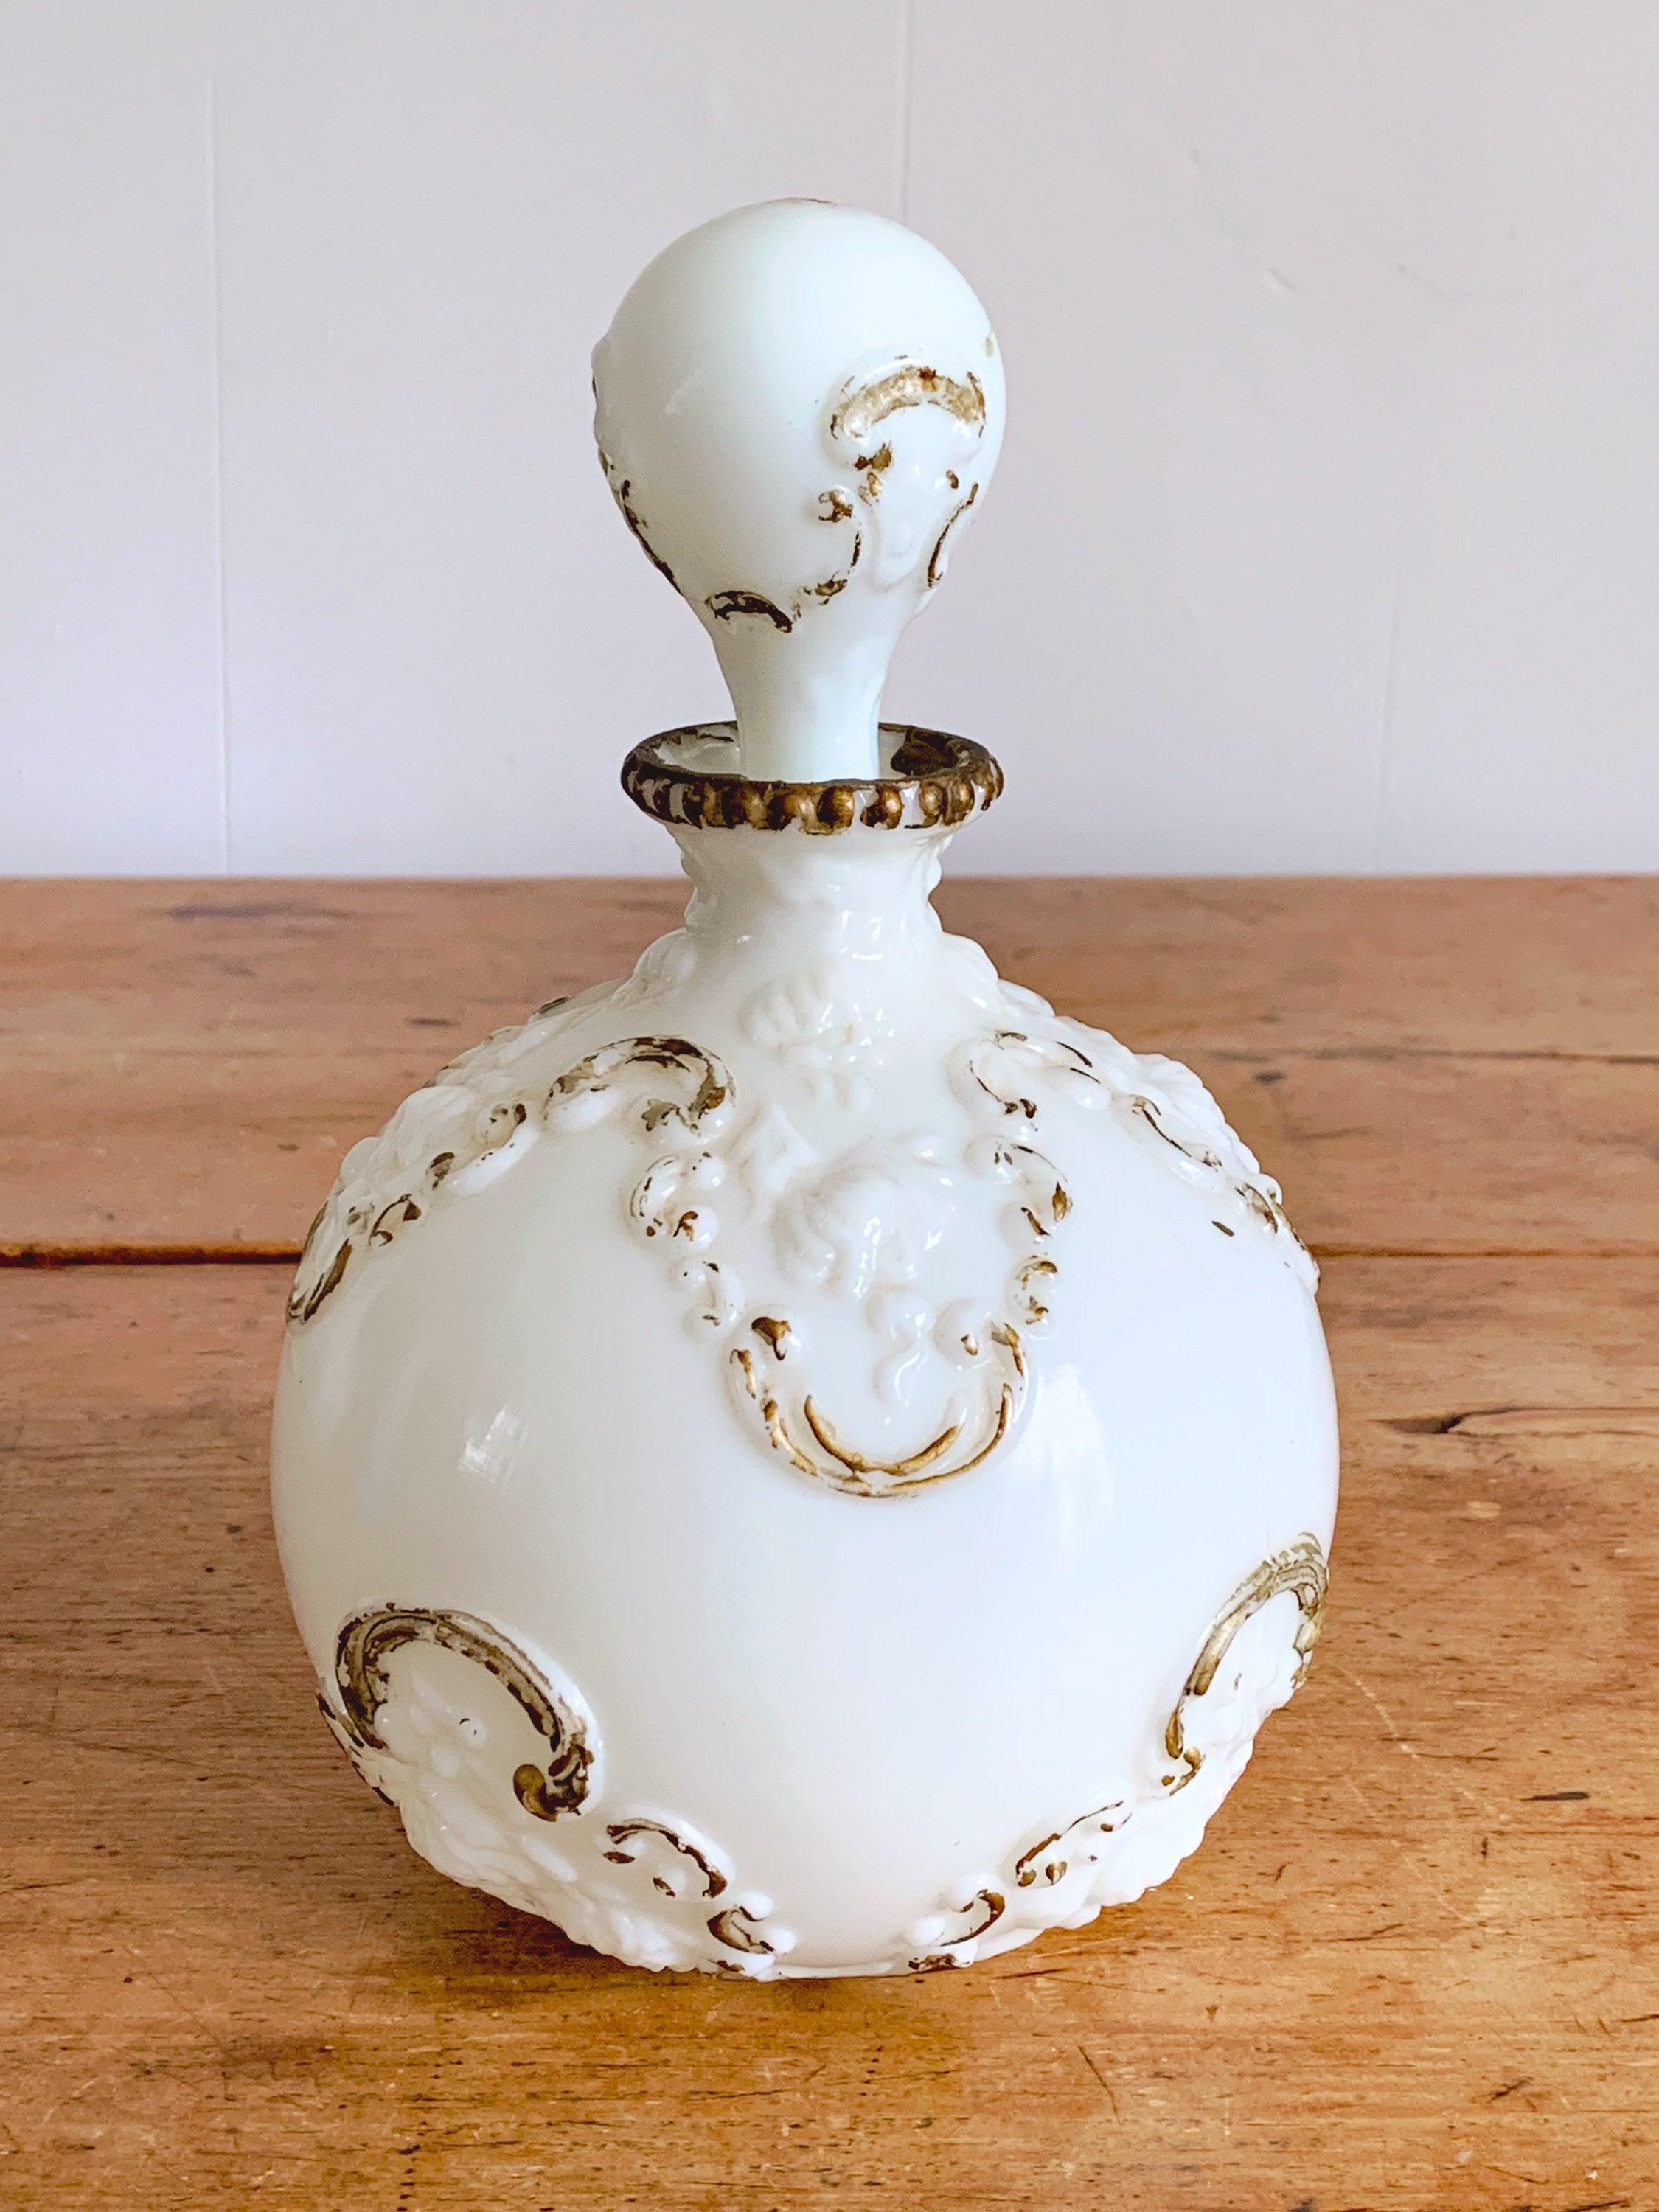 Pair of Giant Vintage Round Opaline Glass Perfume Bottles with Stopper | Decorative Vanity Jars Flower Vase | Victorian Style Home Decor